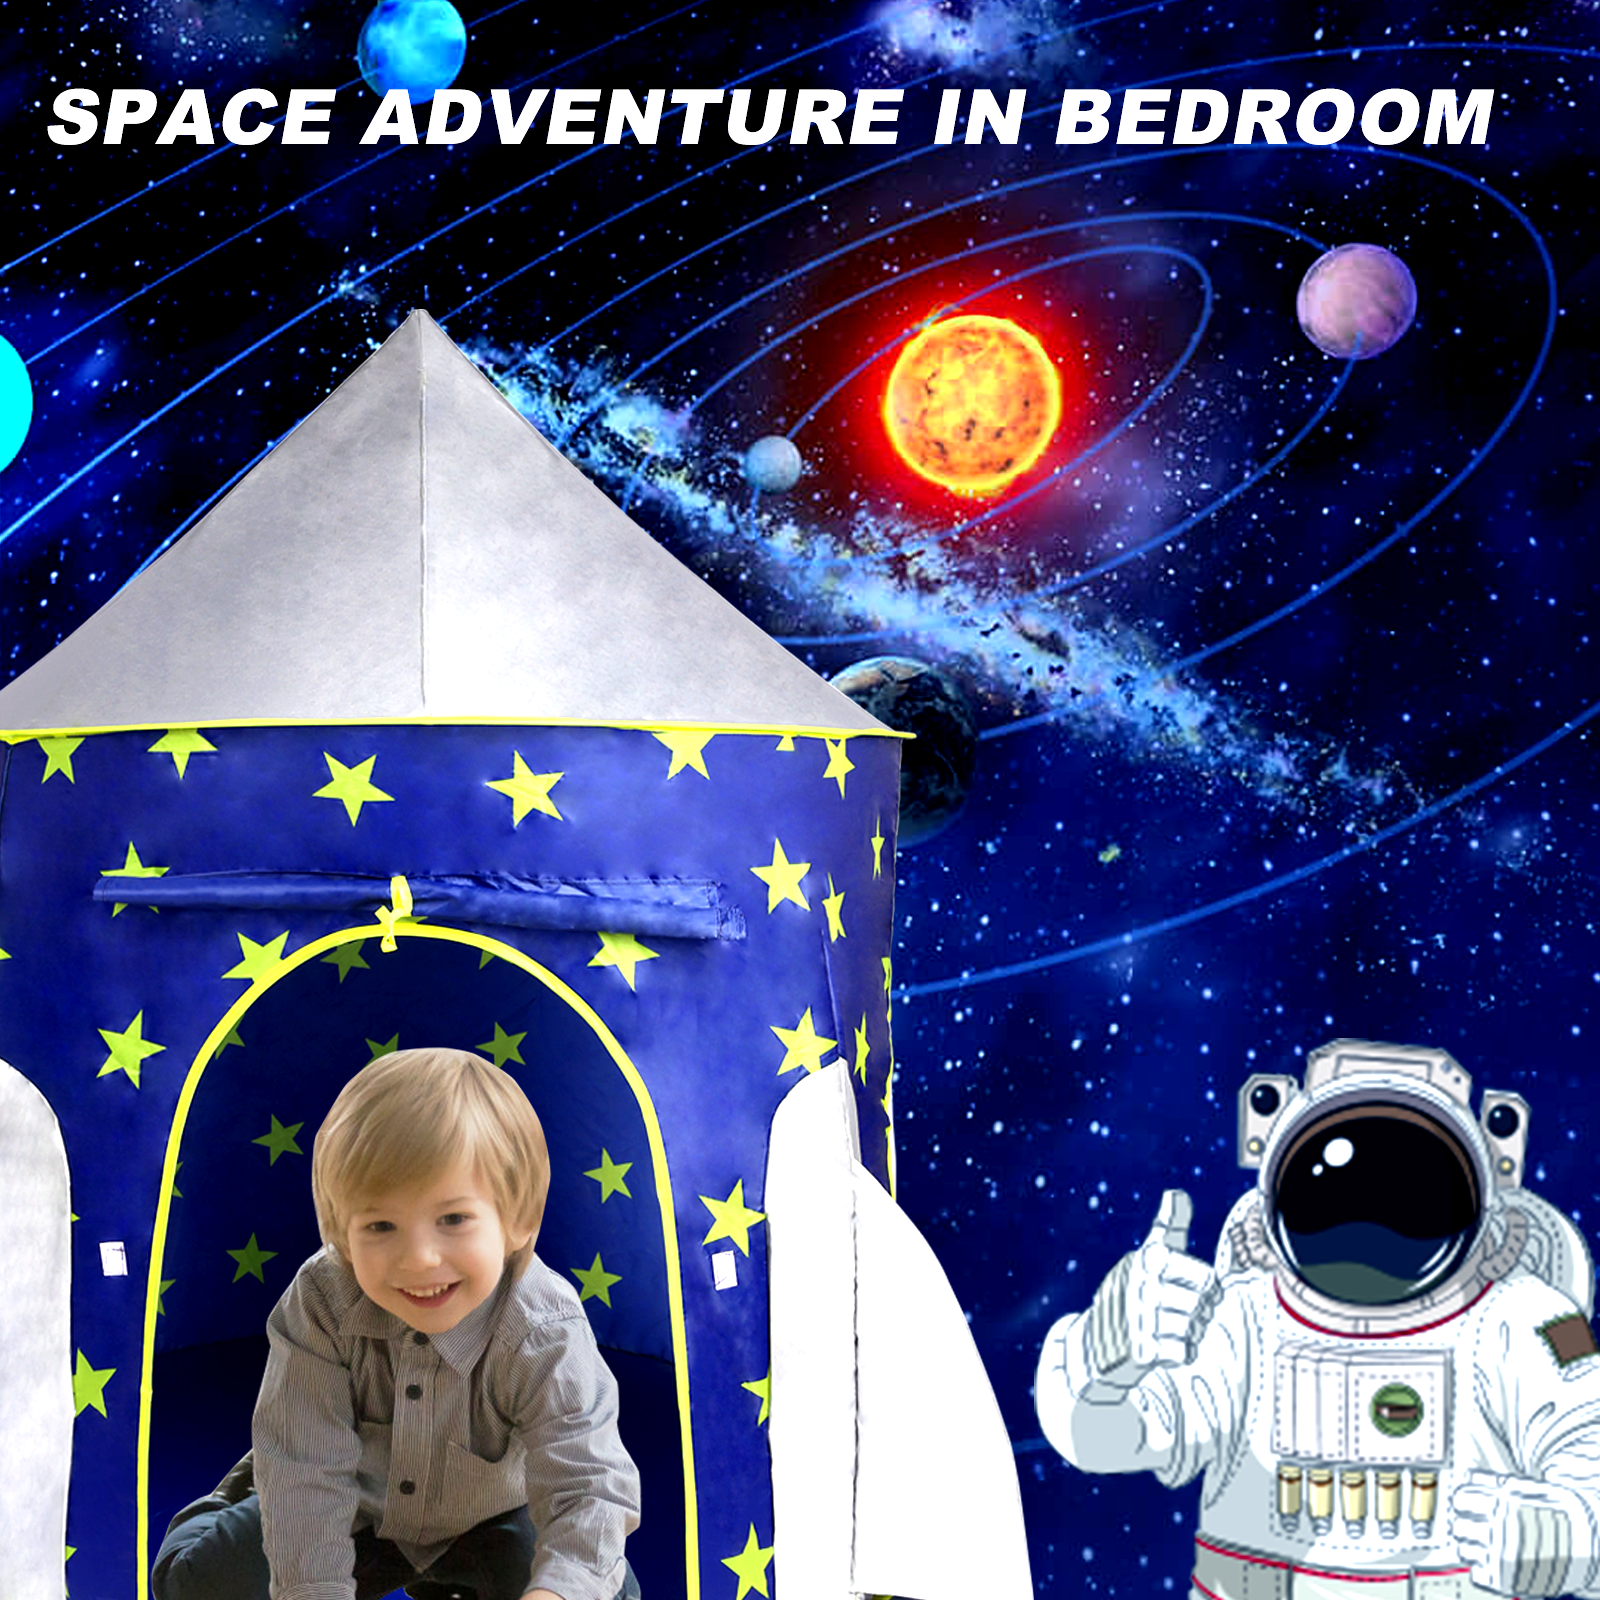 Kids Tent Rocket Spaceship, Kids Play Tent, Unicorn Tent for Boys & Girls, Kids Playhouse, Pop up Tents Foldable, Toddler Tent, Gift for Kids, Indoor & Outdoor, Blue, Space Theme - Tonkn